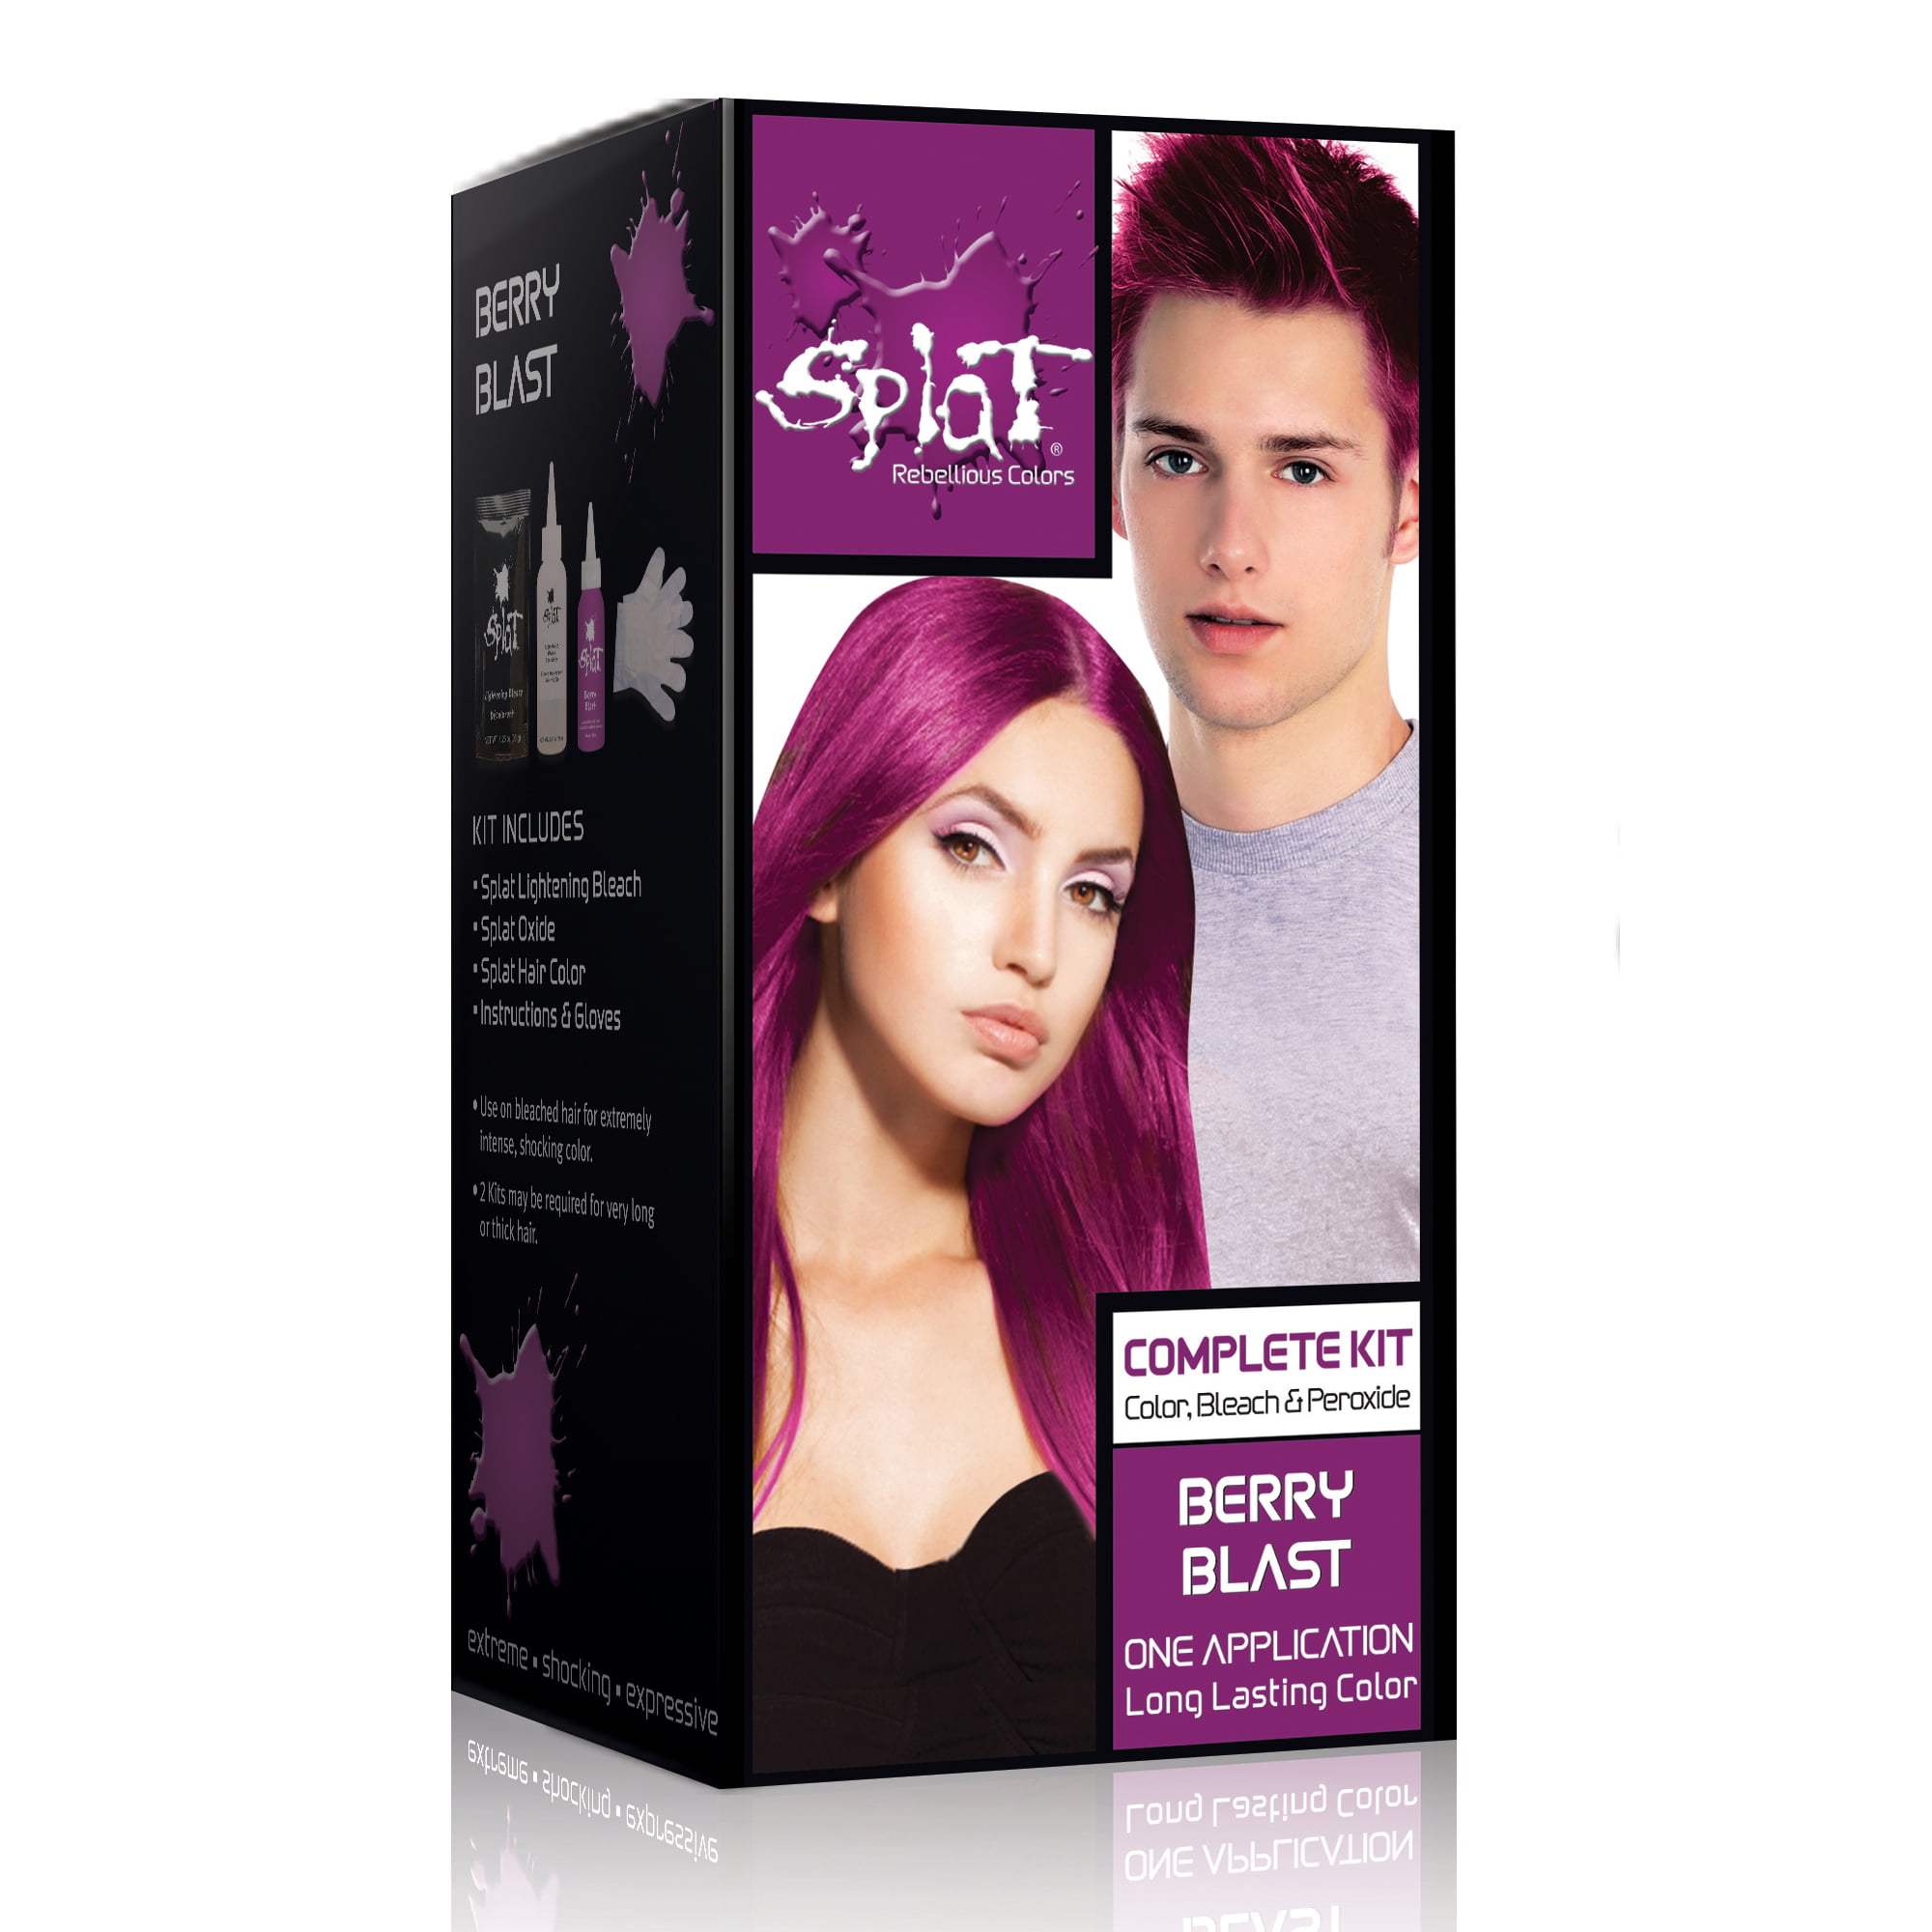 Splat Fire Ombre Semi Permanent Hair Dye For All Hair Colors